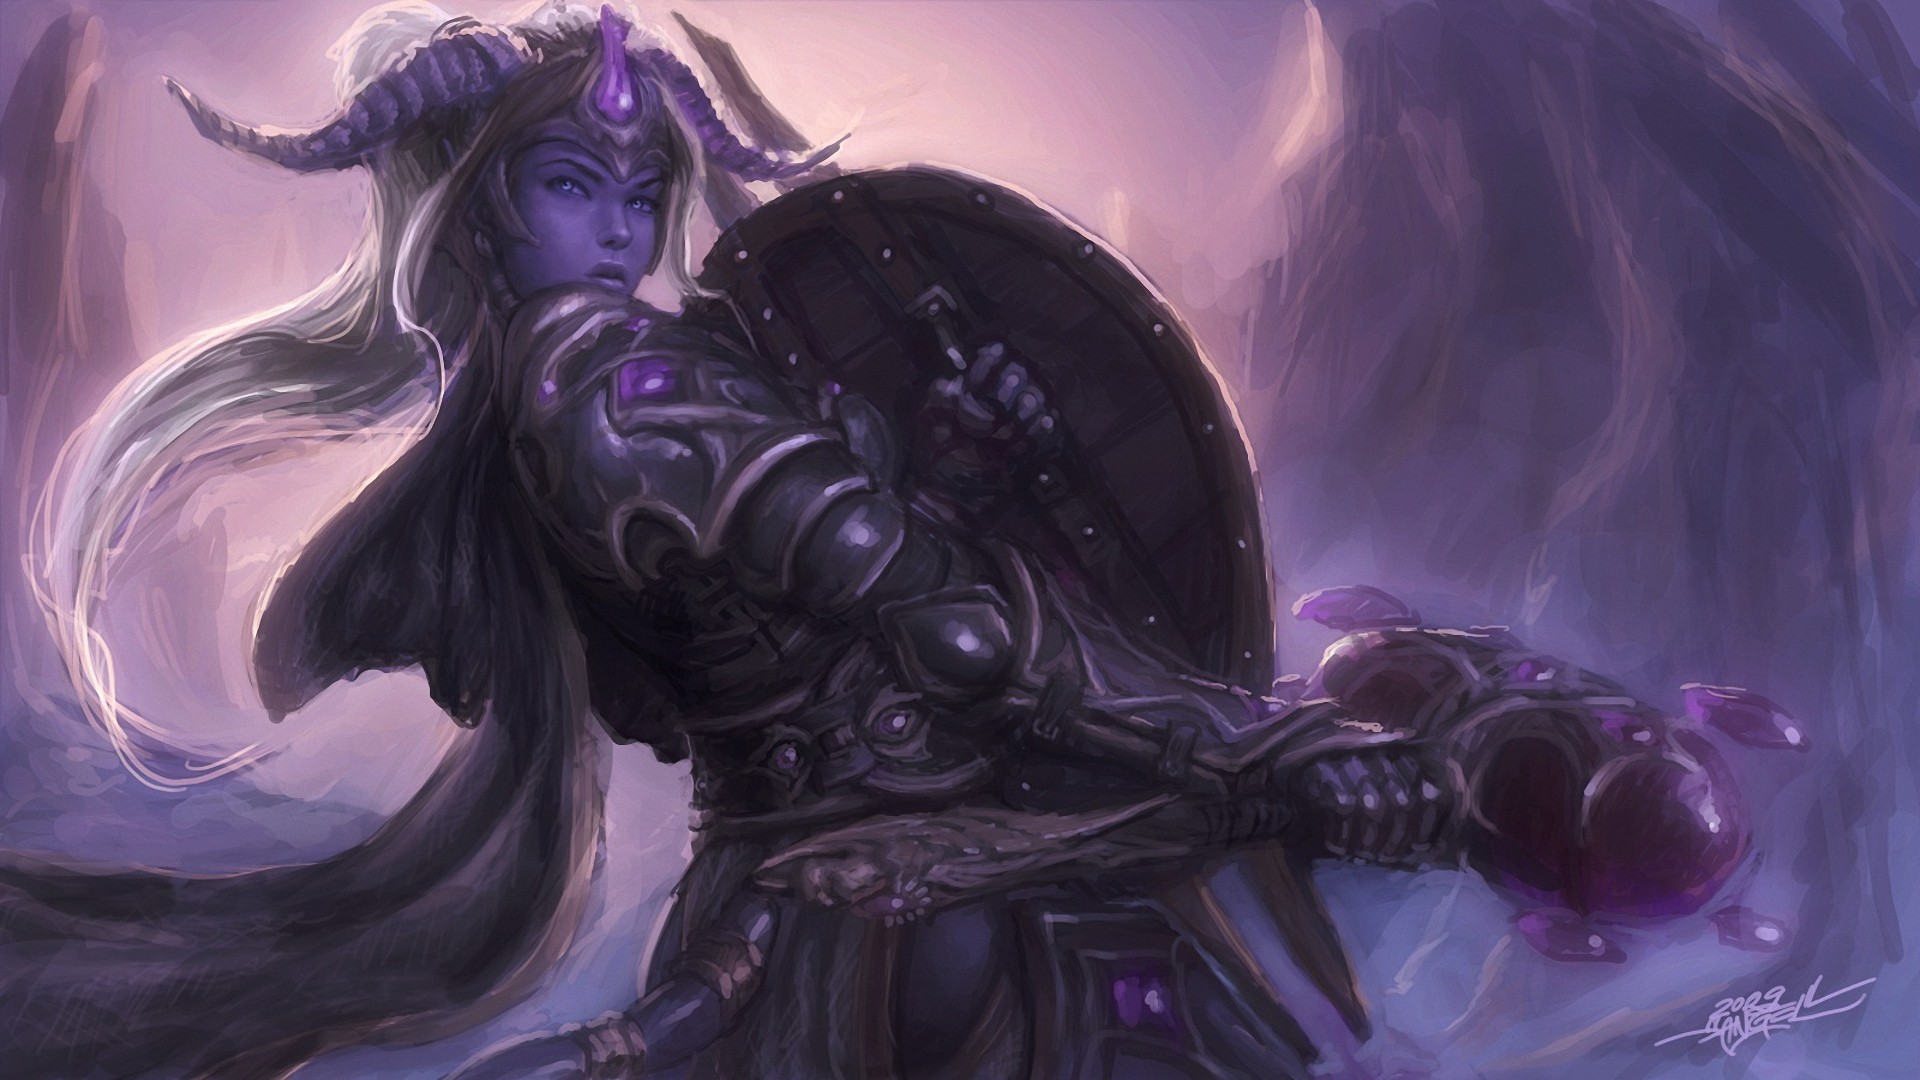 General 1920x1080 paladin horns World of Warcraft draenei video games PC gaming video game art video game girls fantasy armor armor fantasy art fantasy girl long hair